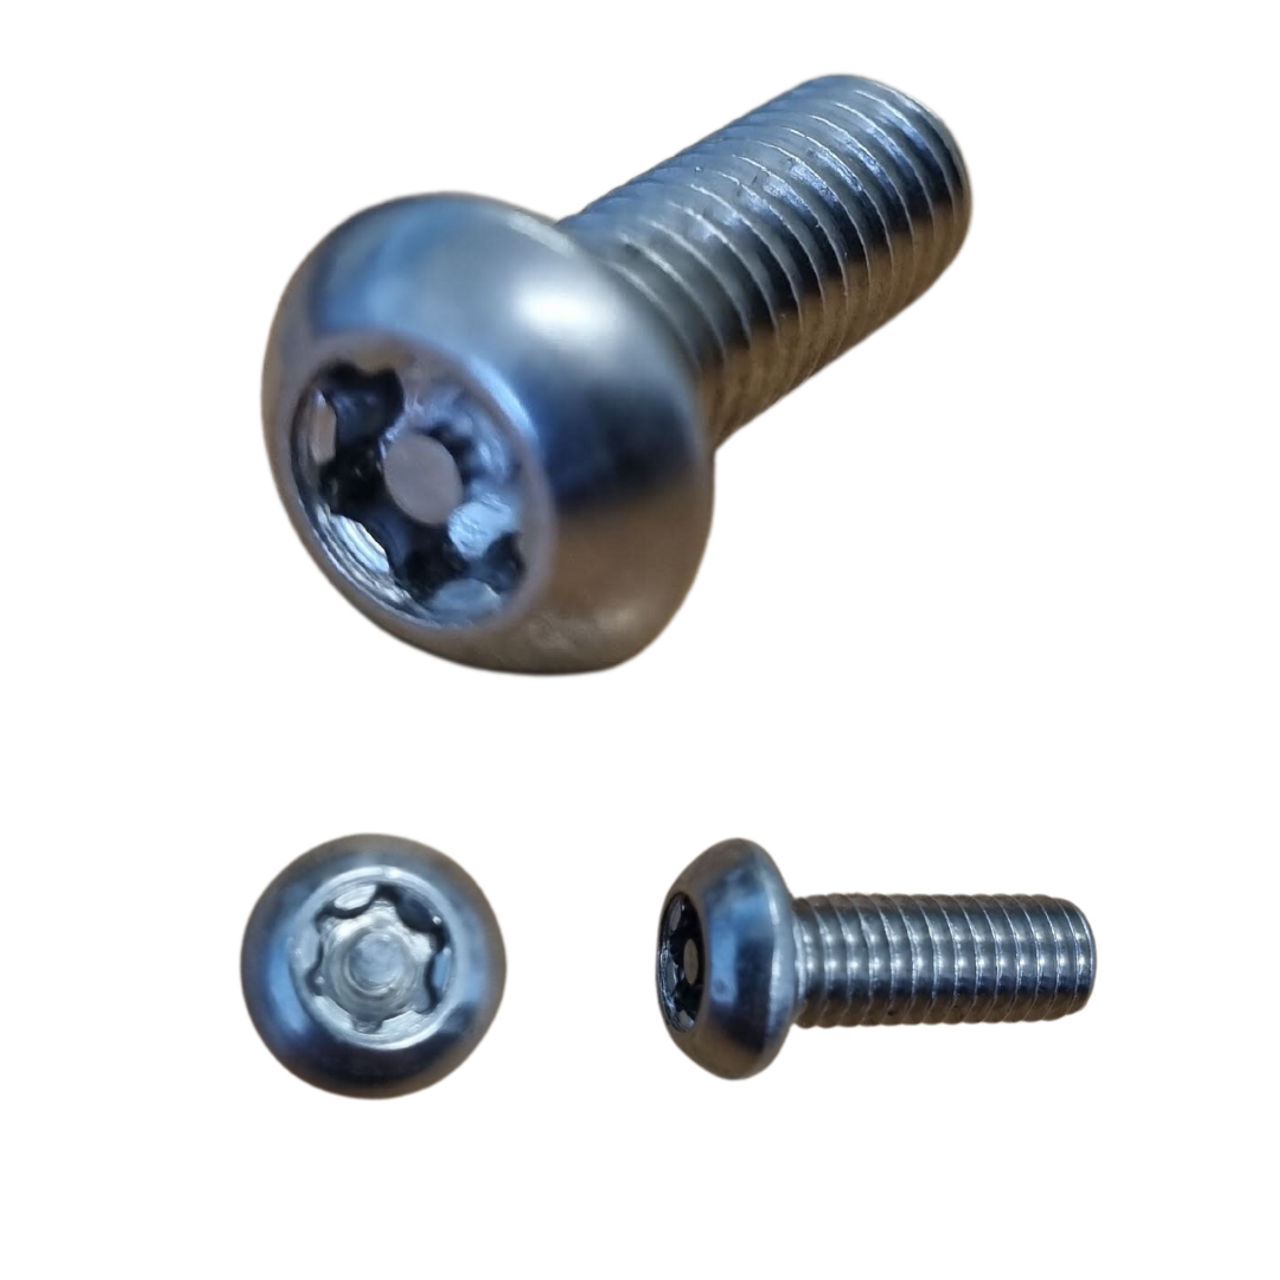 Anti Theft Nuts and Bolts/ Tamper Proof Stainless Steel Security Bolt